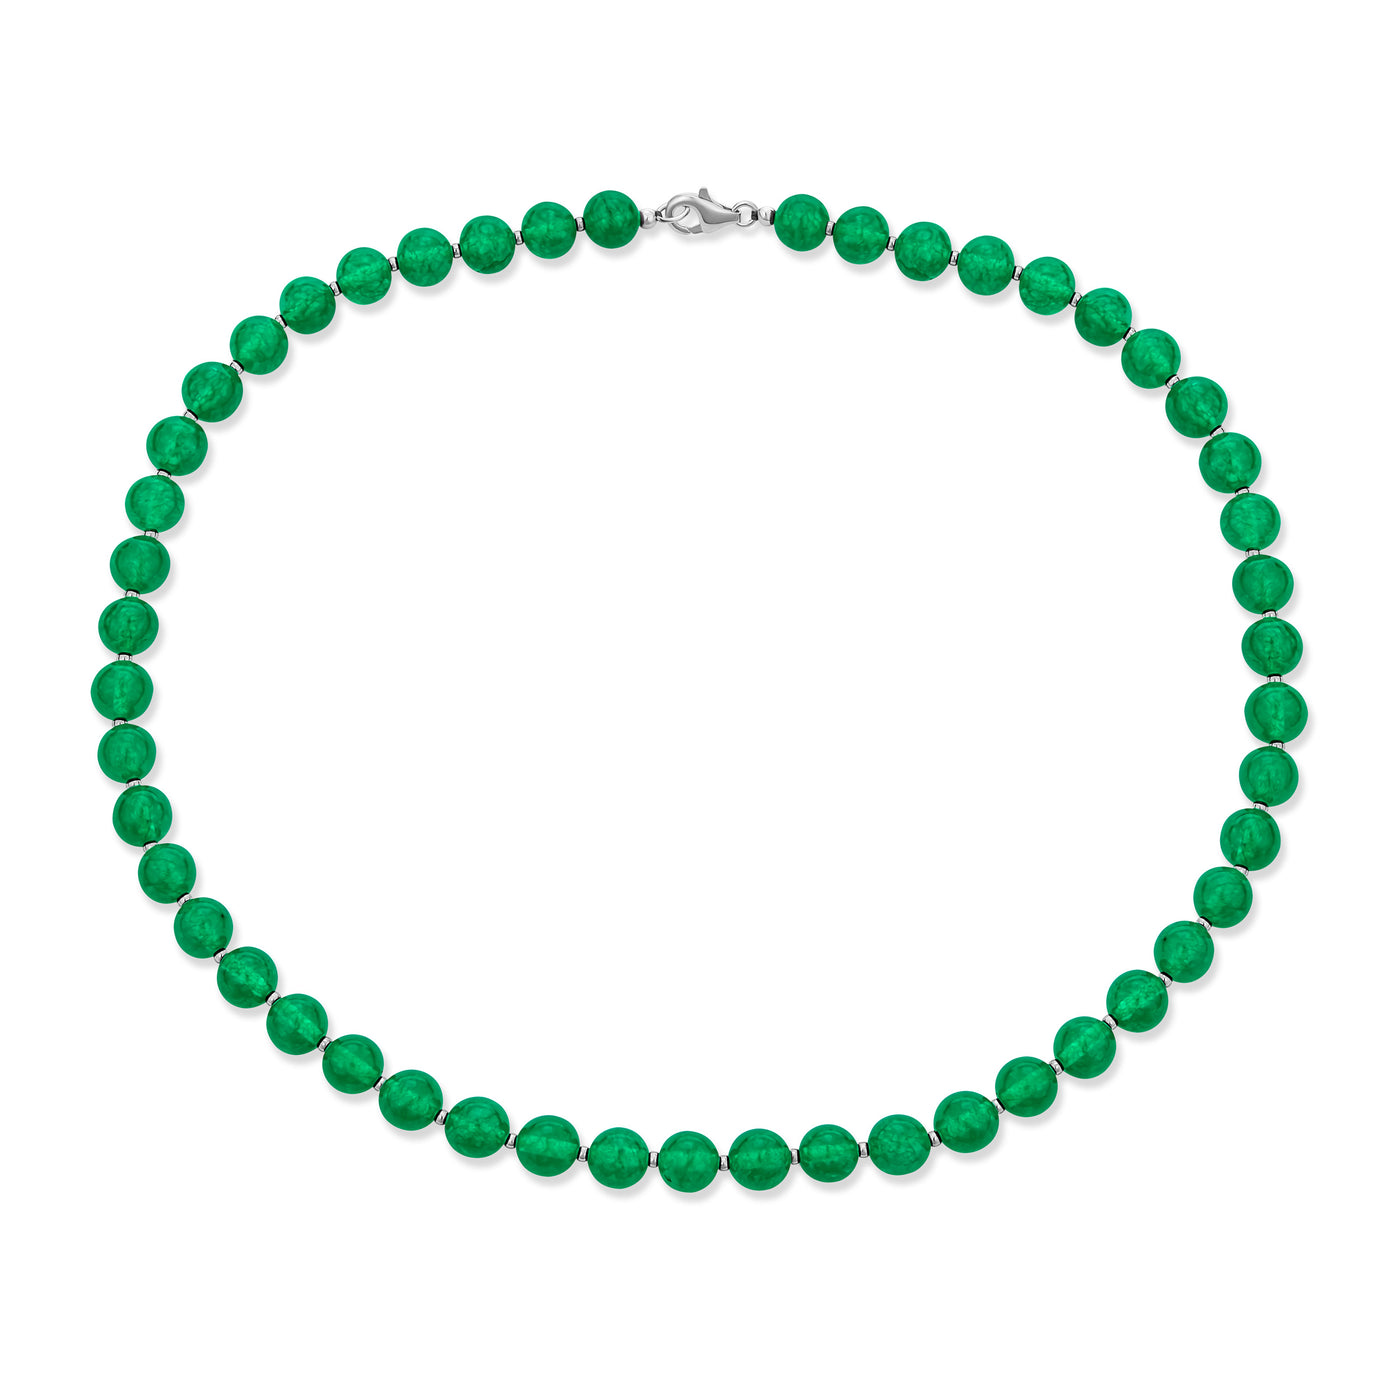 Imitation Jade Pendant Long Bead Strand Necklace Sterling Silver 20 In